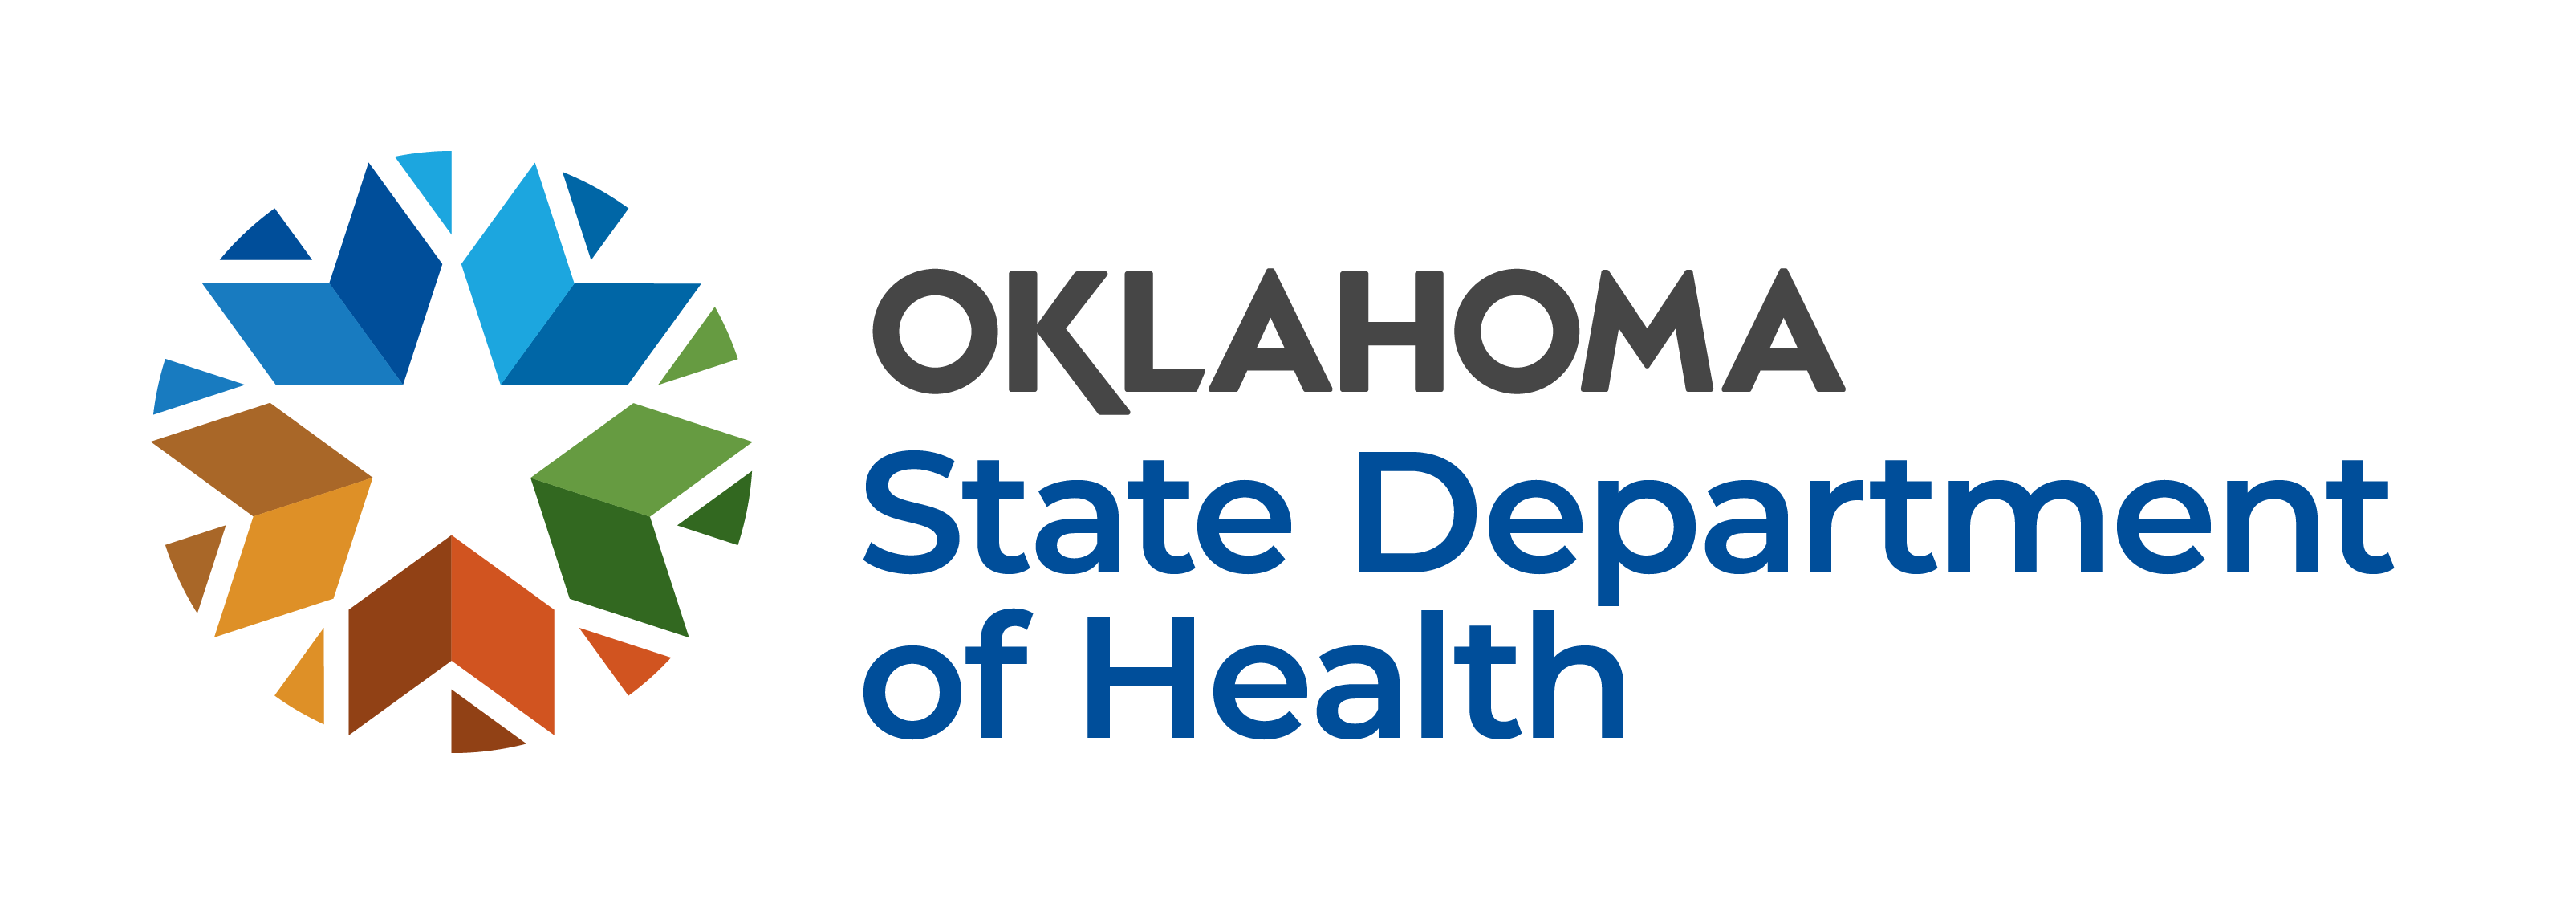 Oklahoma State Department of Health (340)